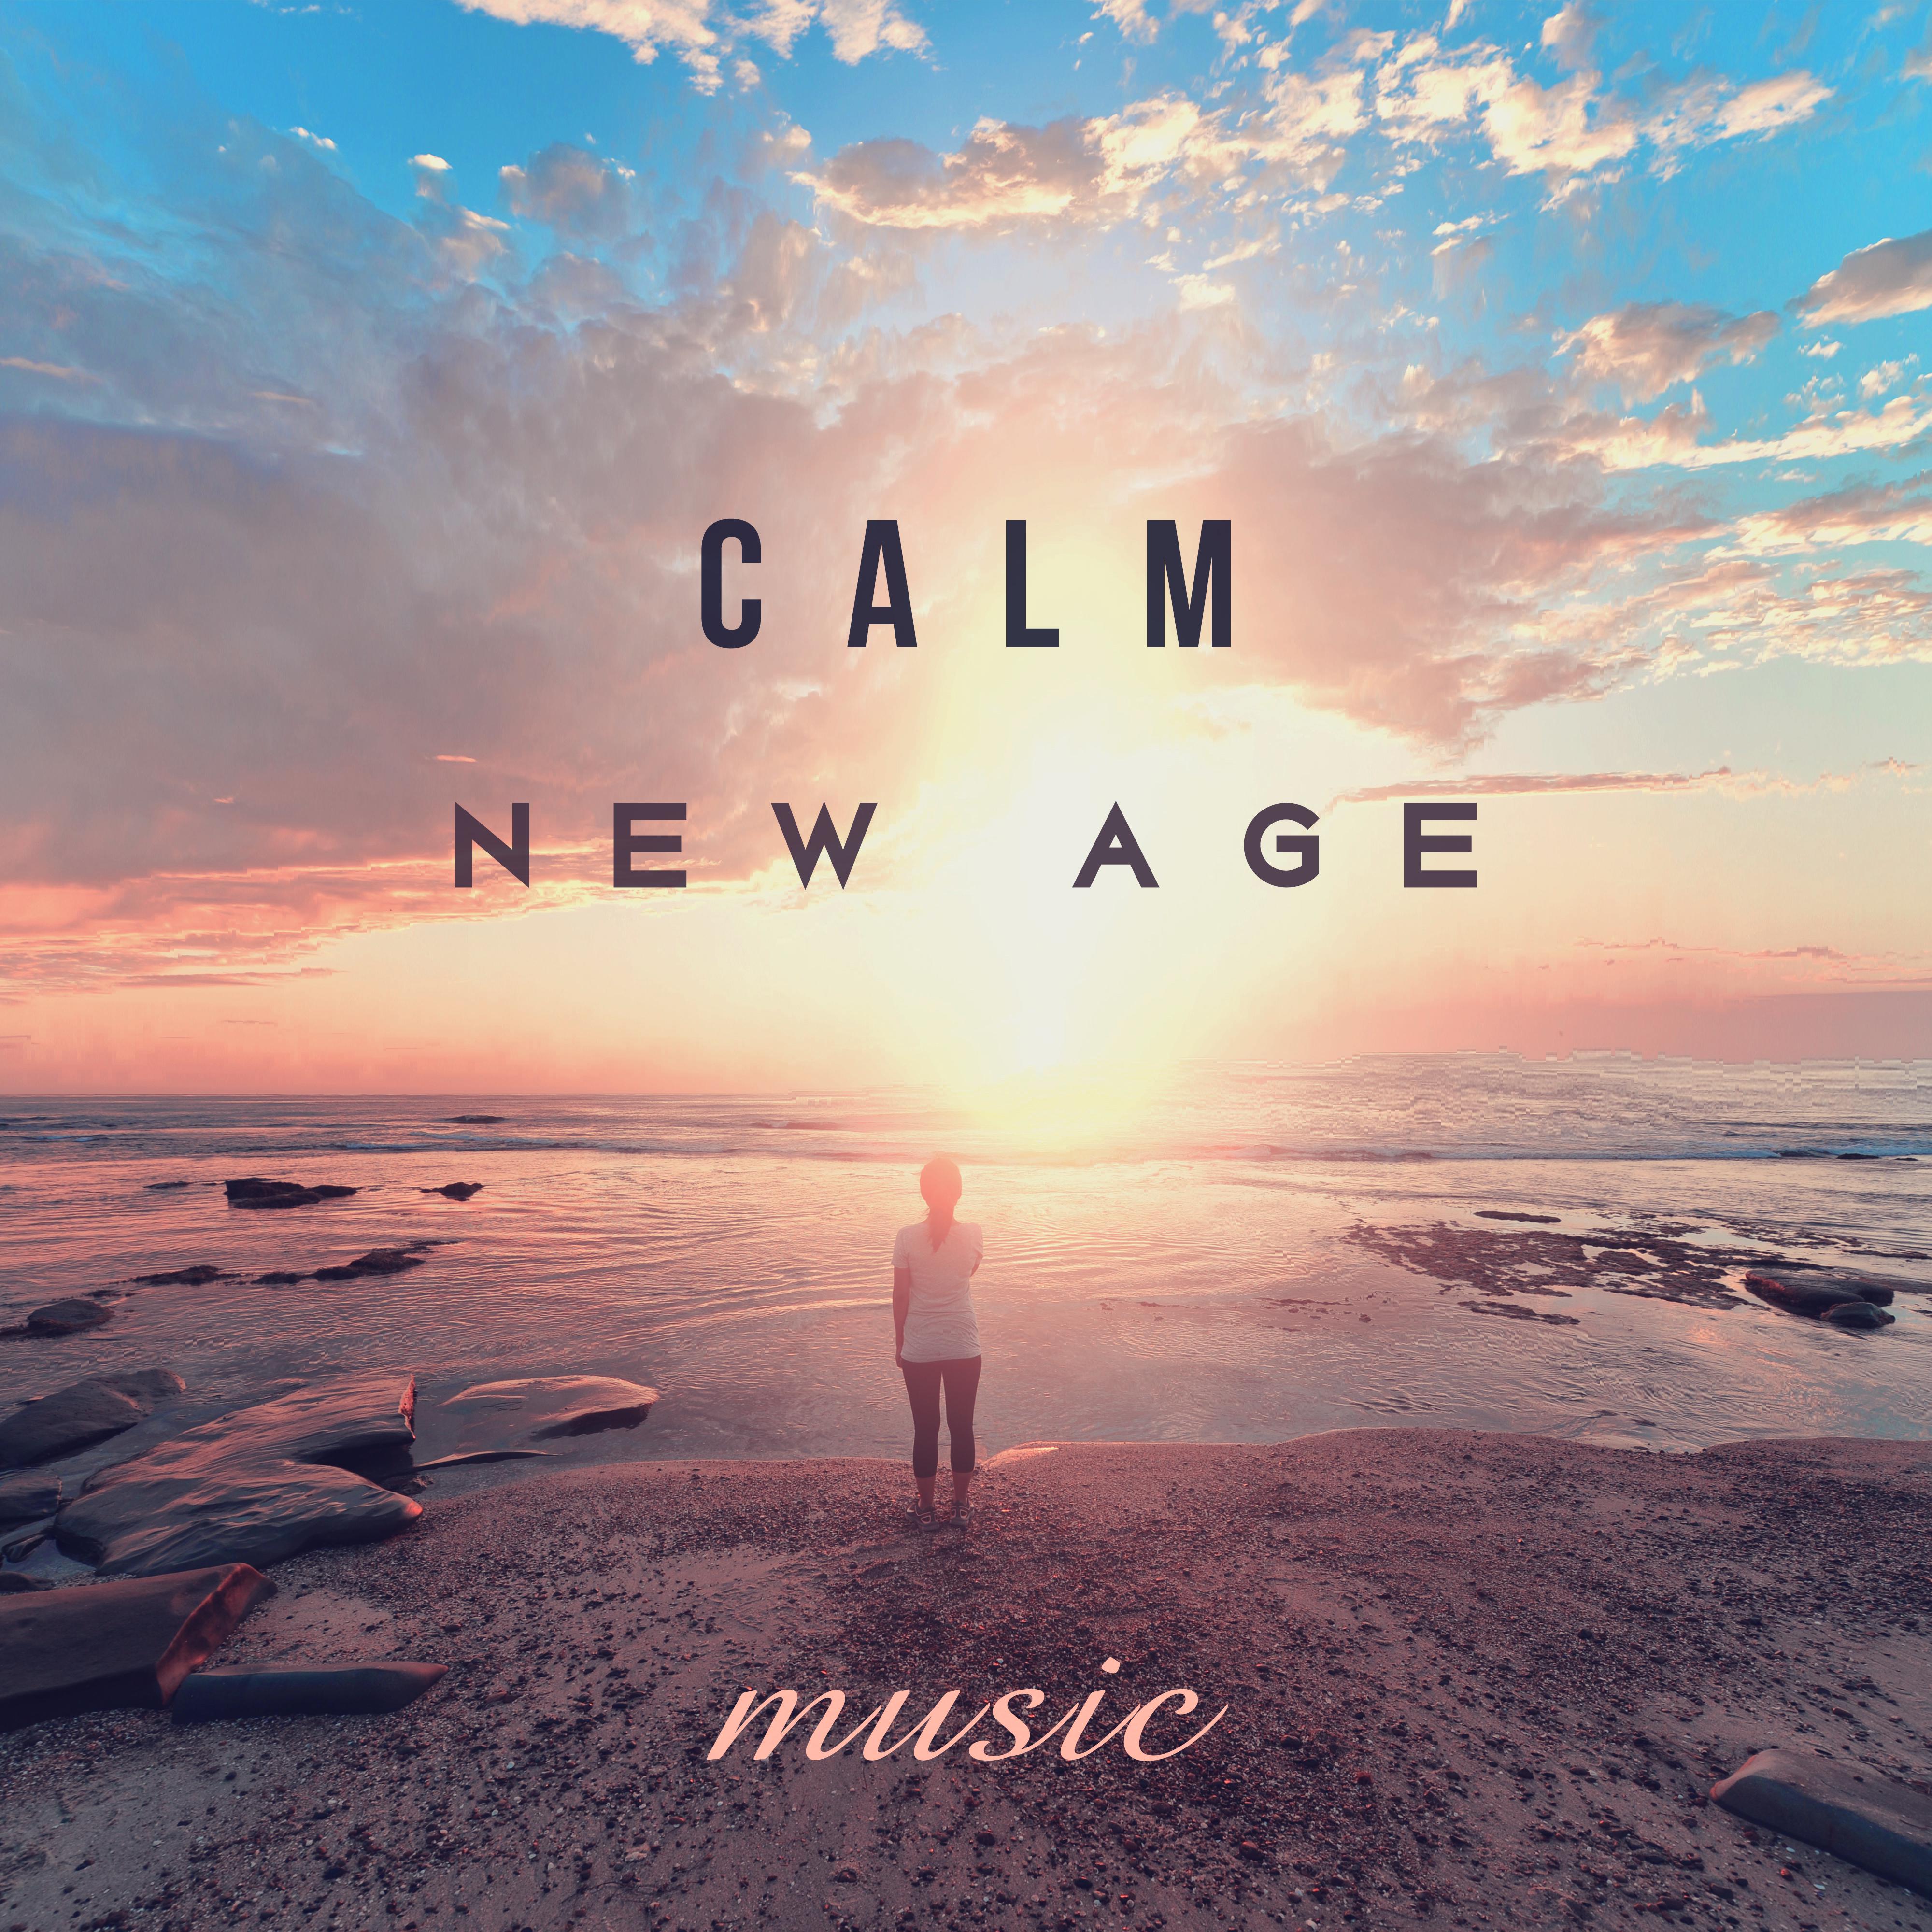 Calm New Age Music  Relax  Rest, Soft Sounds to Calm Down, Easy Listening, Mind Peace, Chilled Songs